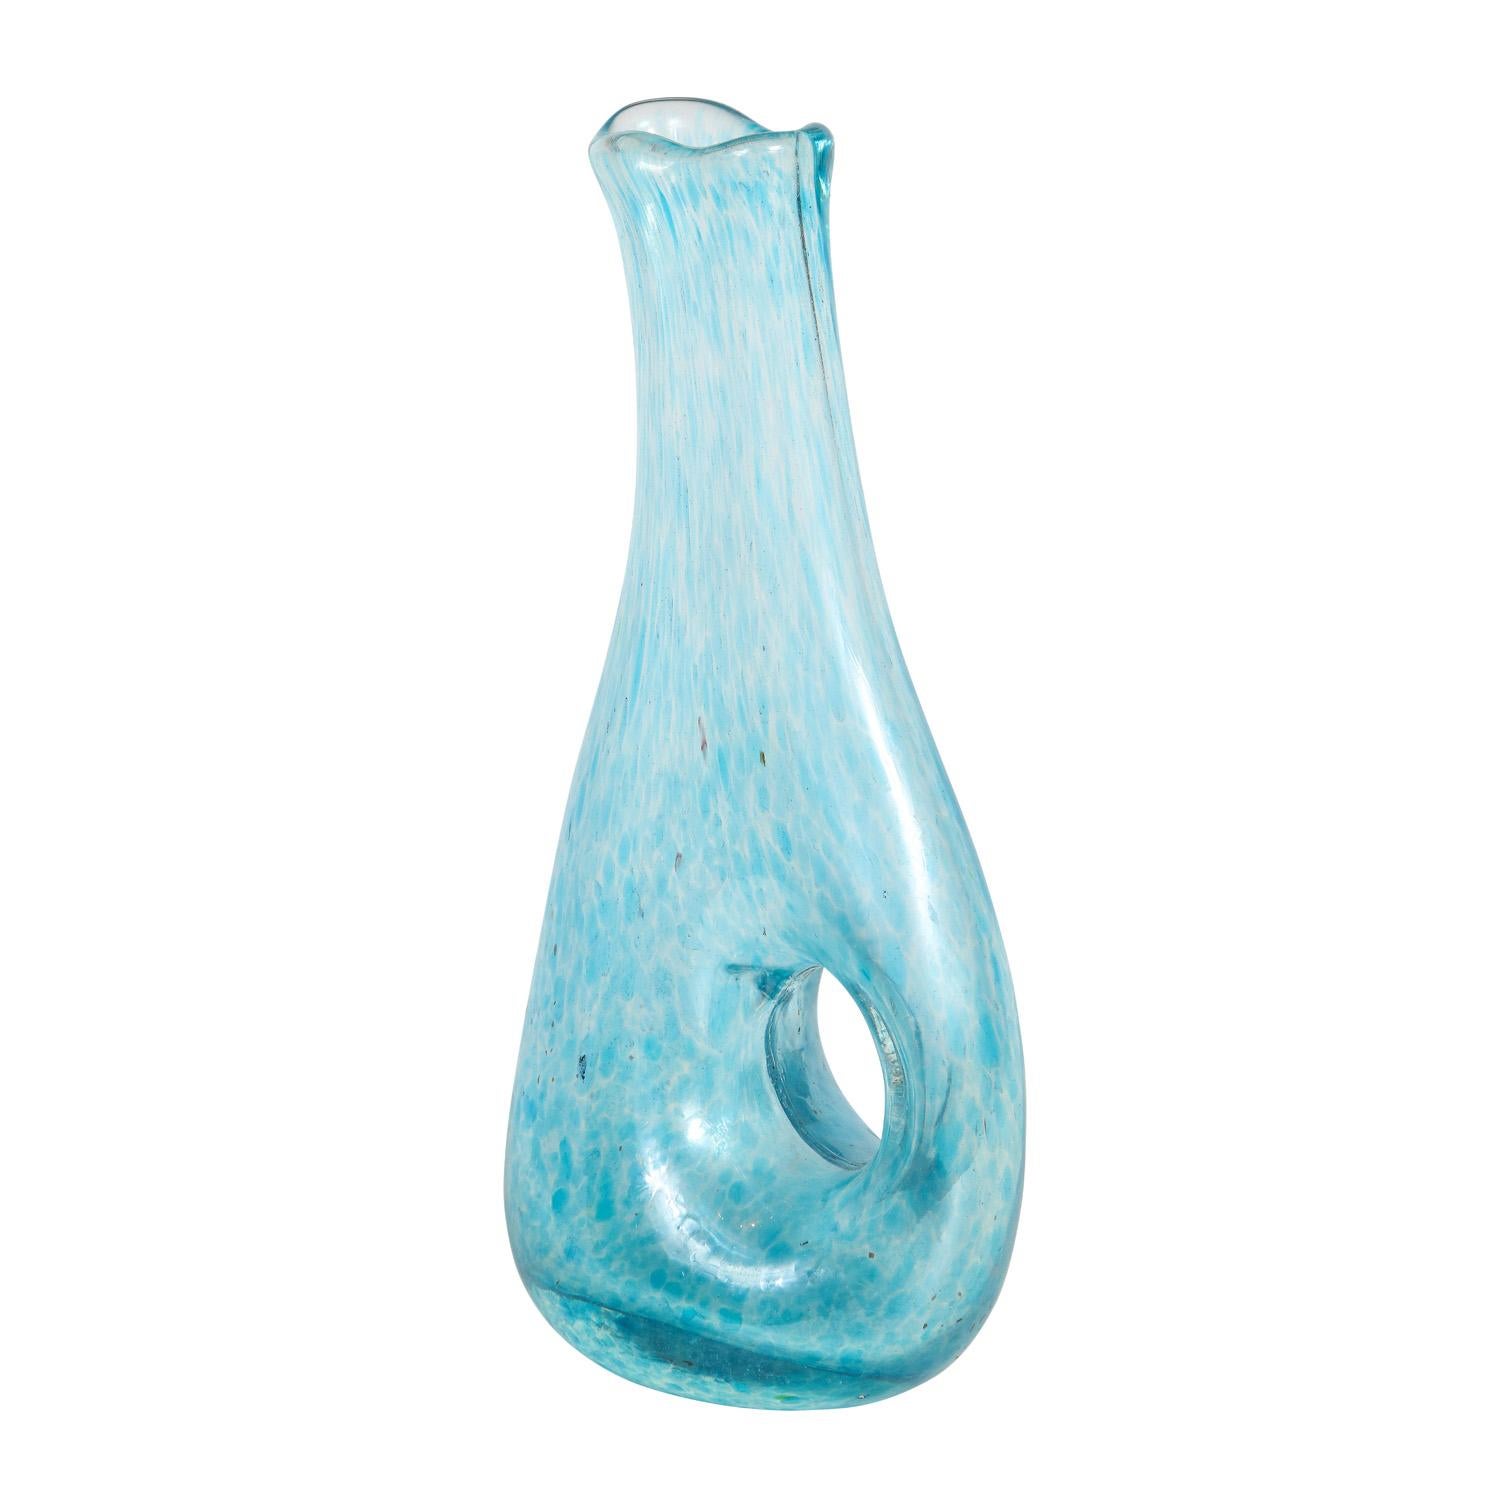 Hand blown glass vase with blue glass fragments, iridized with hole in the middle, by Arte Vetraria Muranese (A.V.E.M.), Murano Italy 1950's. The visual effects of the glass fragments are quite stunning. In the 1950’s with the sculptures of artists